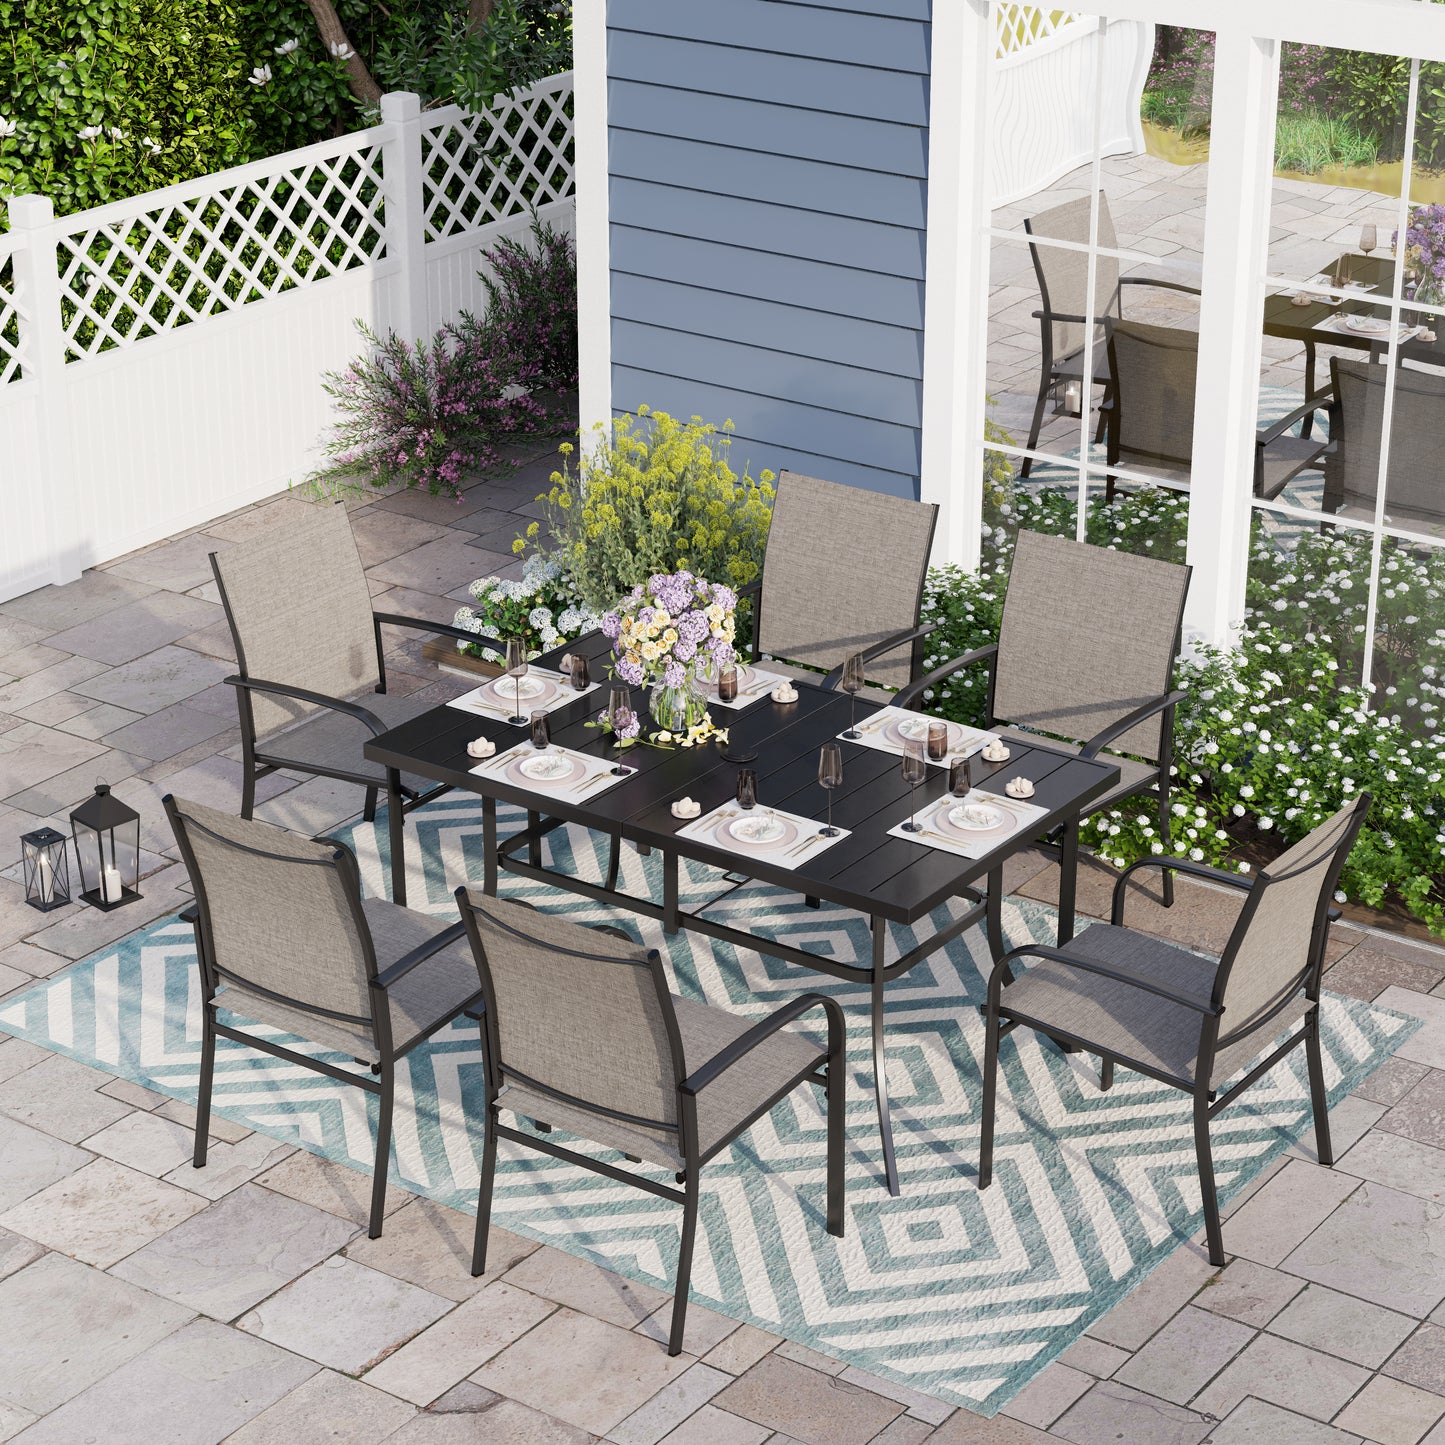 Sophia & William 7 Piece Patio Dining Set with Textilene Chairs and Rectangular Table